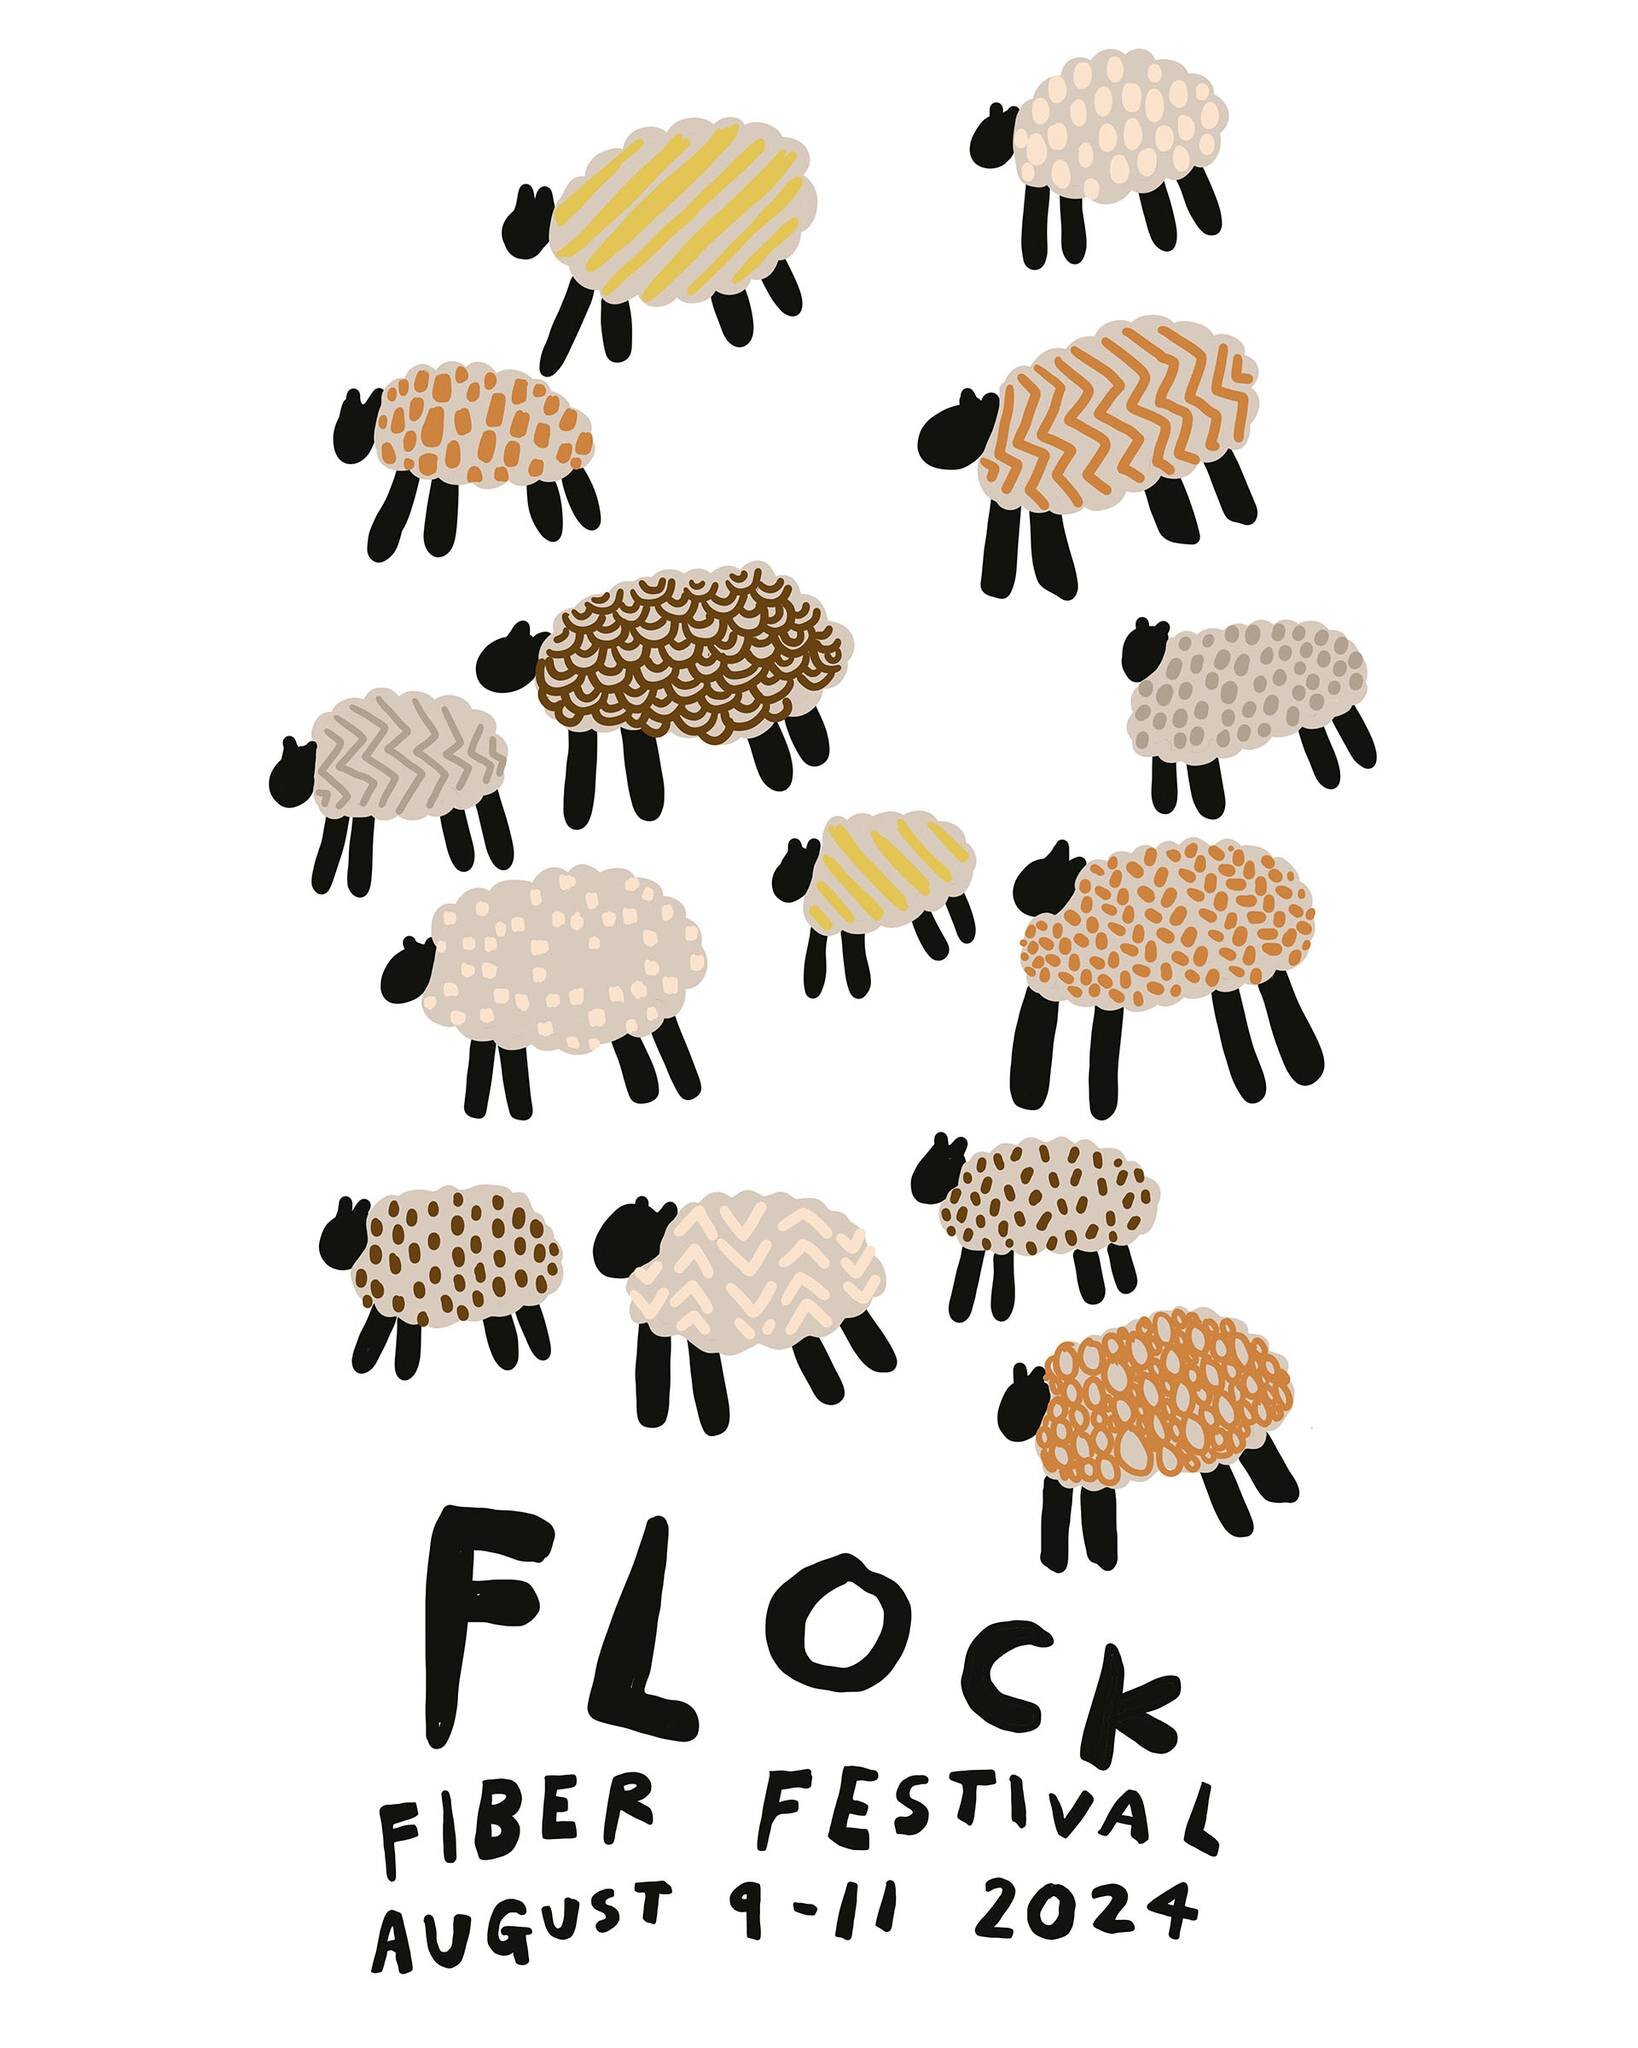 I'm pretty excited to announce that I will be a vendor at Flock Fiber Festival. All thanks to the wonderful @blarneyyarn who pushed me to share a booth with her. We are so excited to be designing a booth together with lots of pretty things! Stay tune